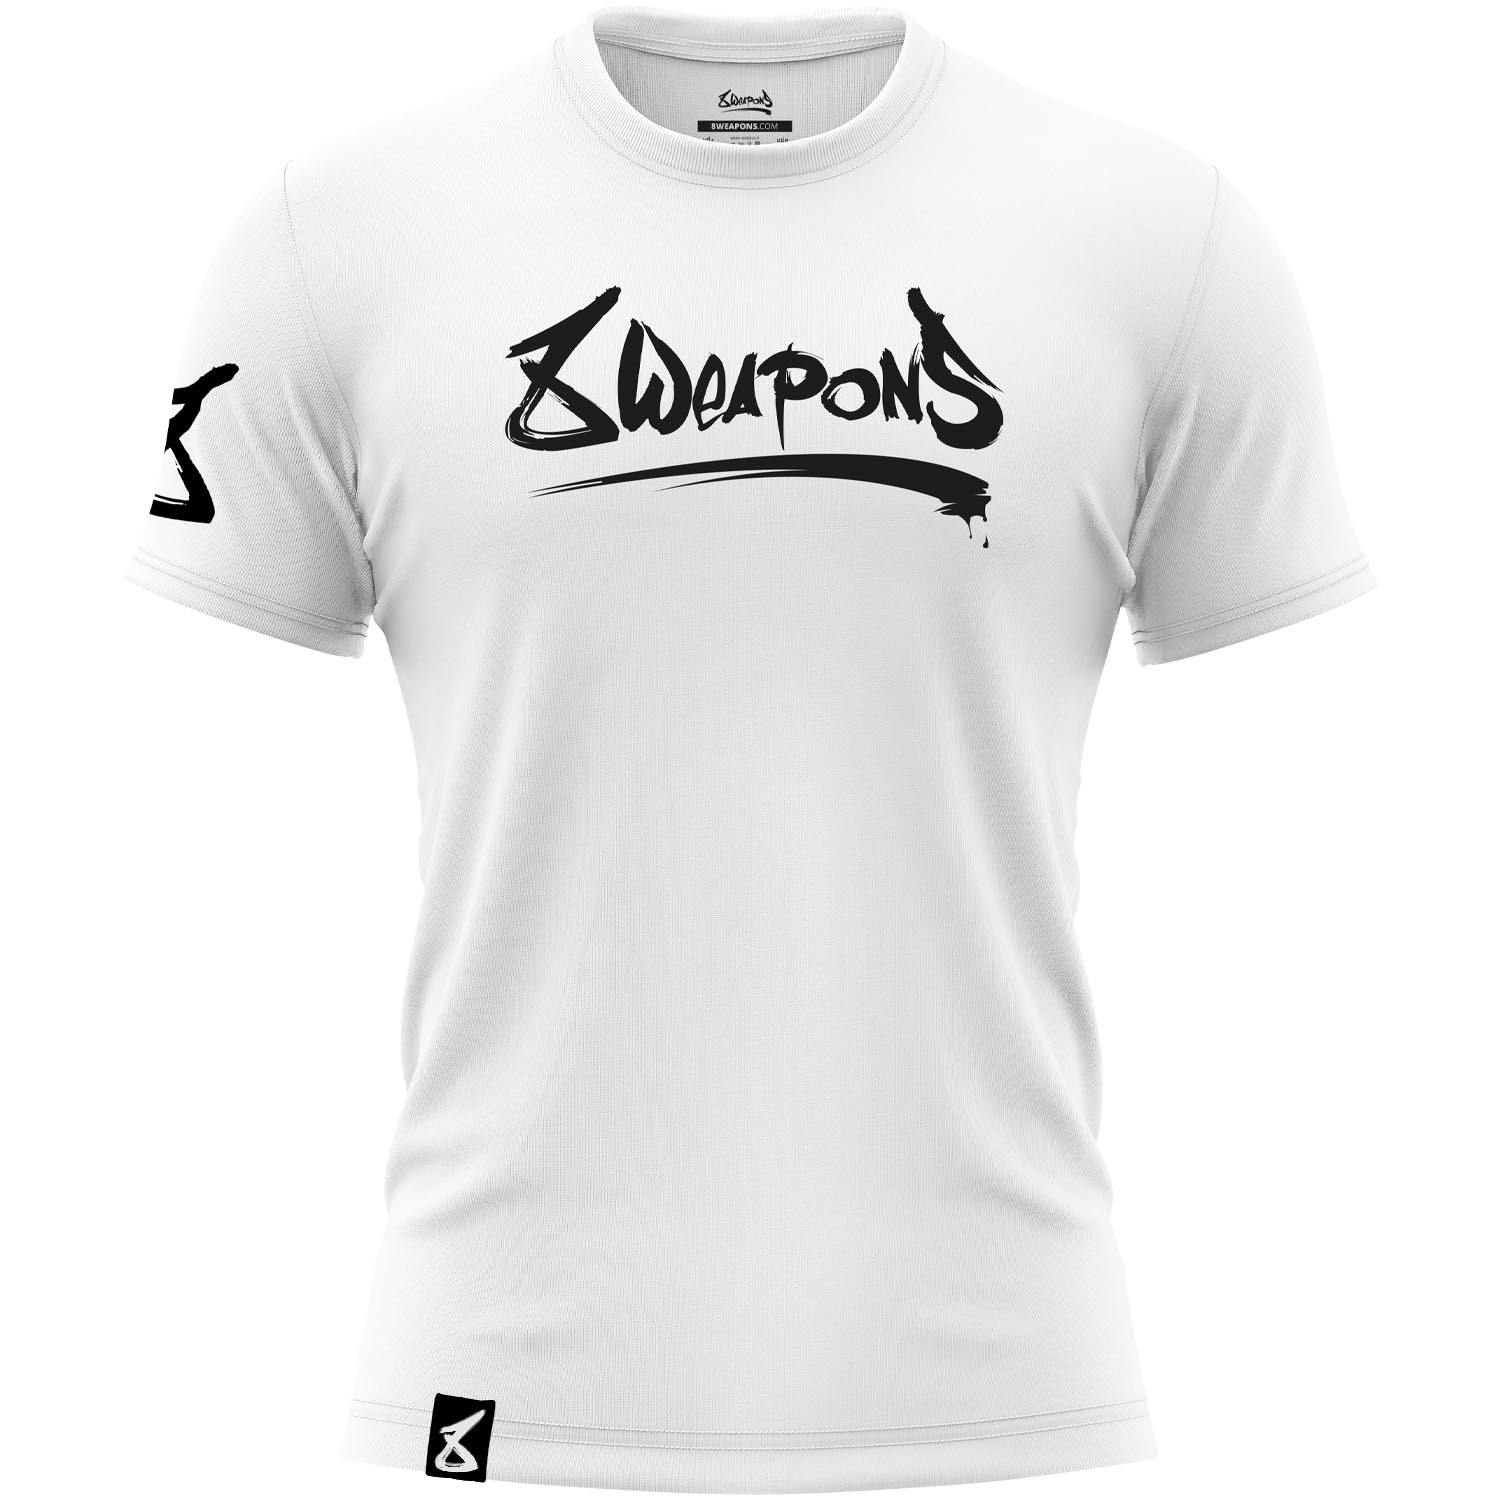 8 WEAPONS T-Shirt, Unlimited 2.0, white